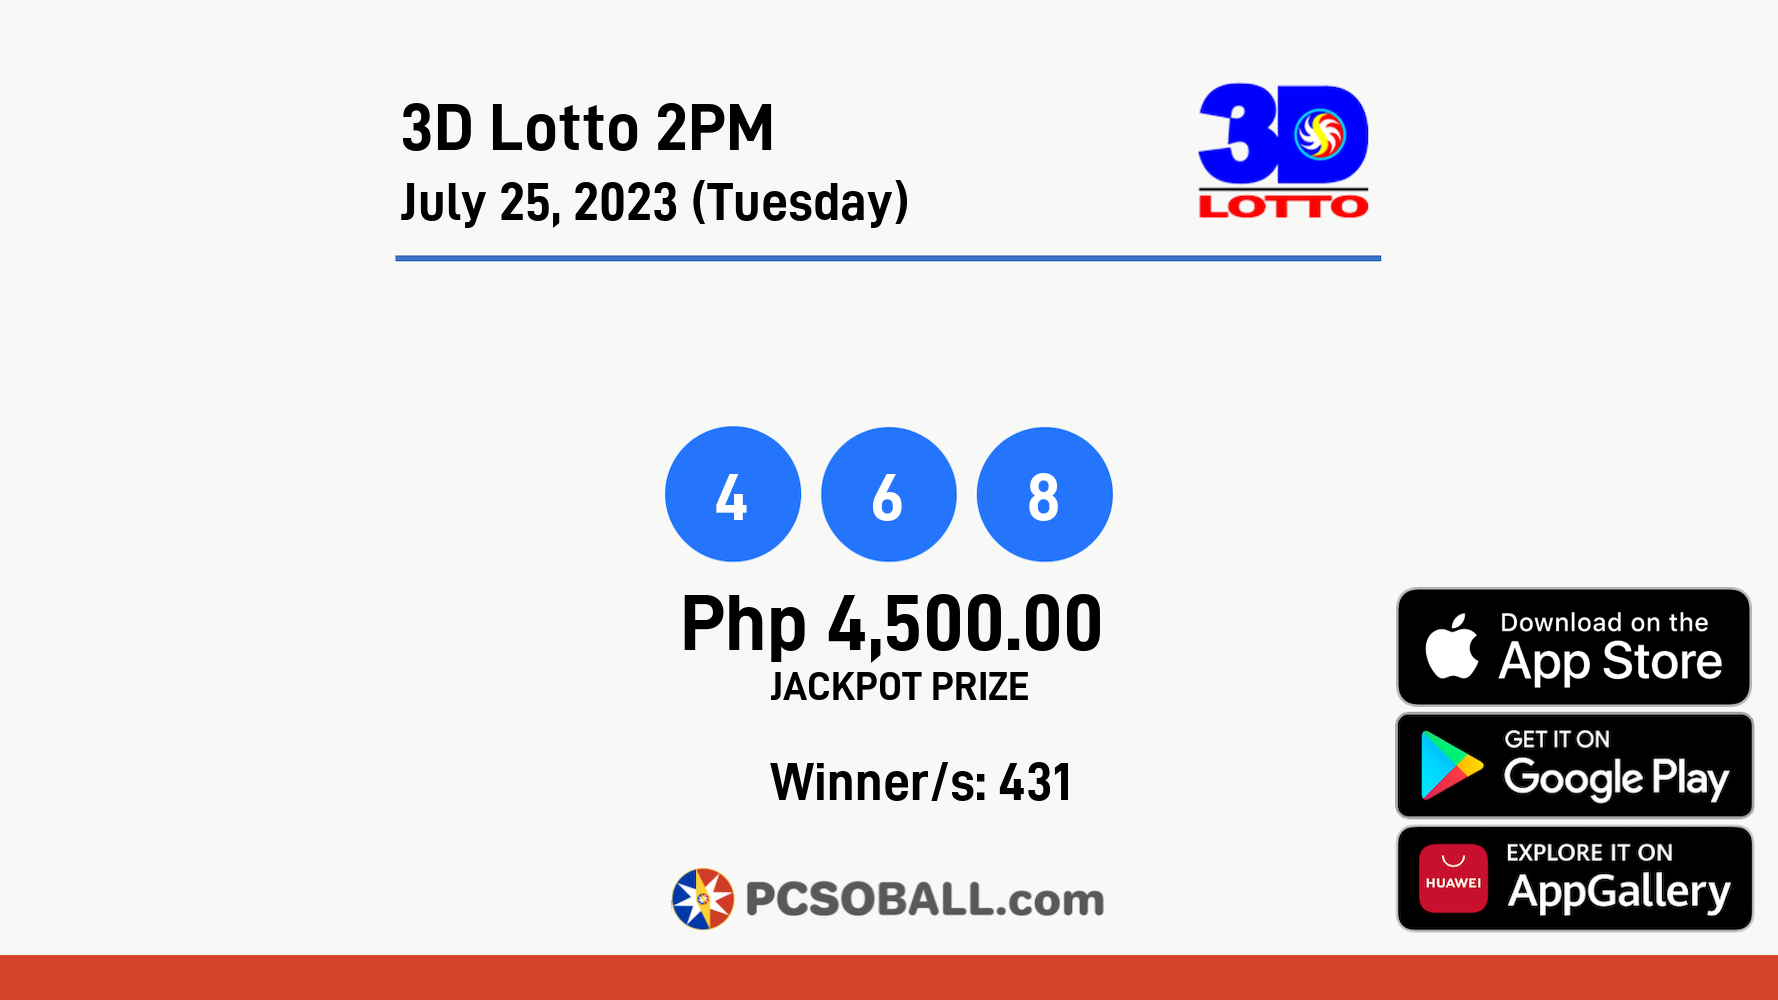 3D Lotto 2PM July 25, 2023 (Tuesday) Result